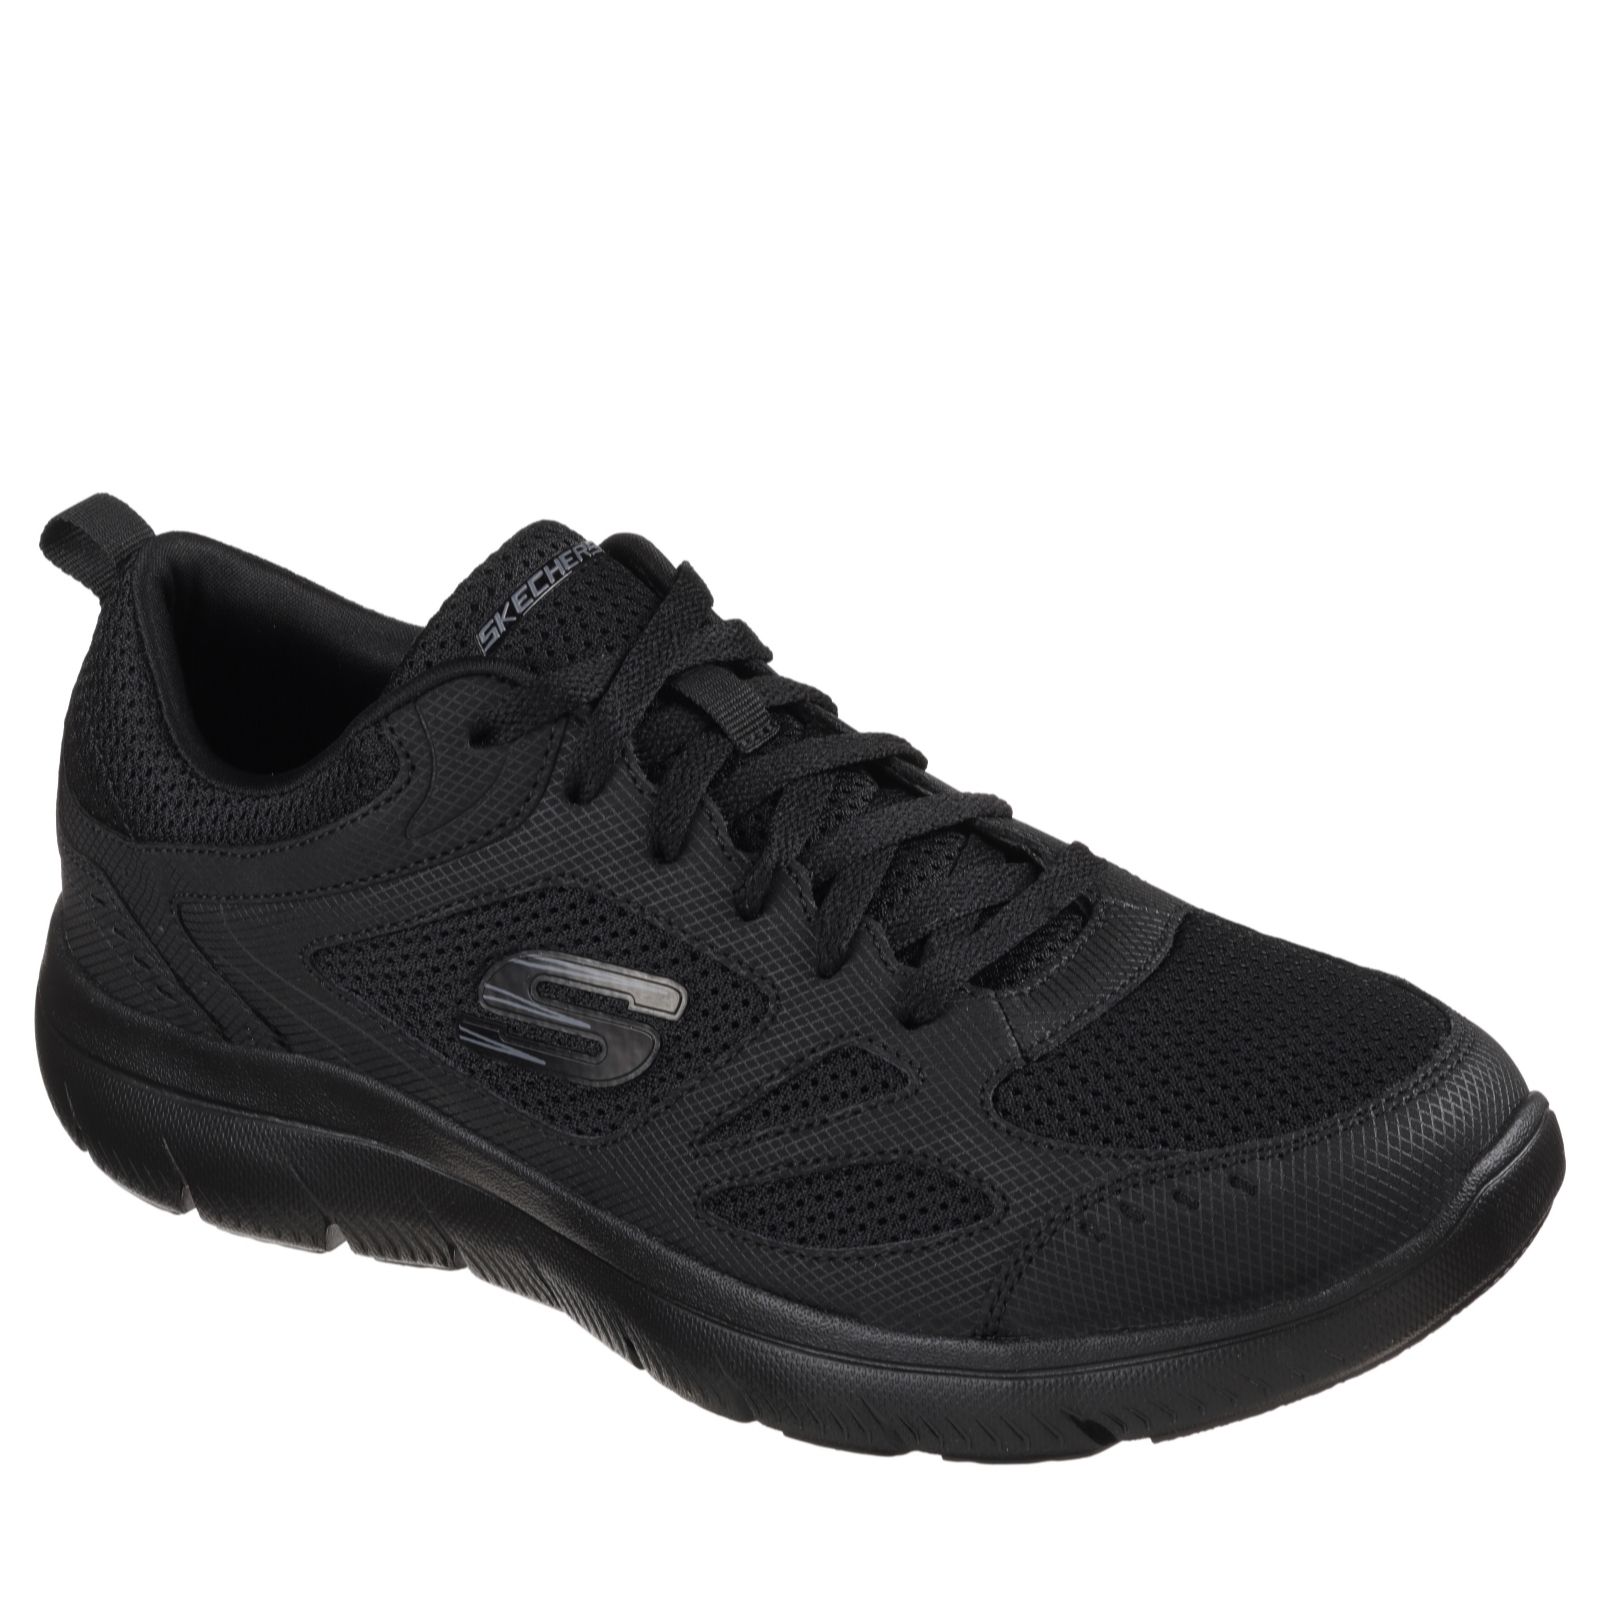 skechers summits south rim review